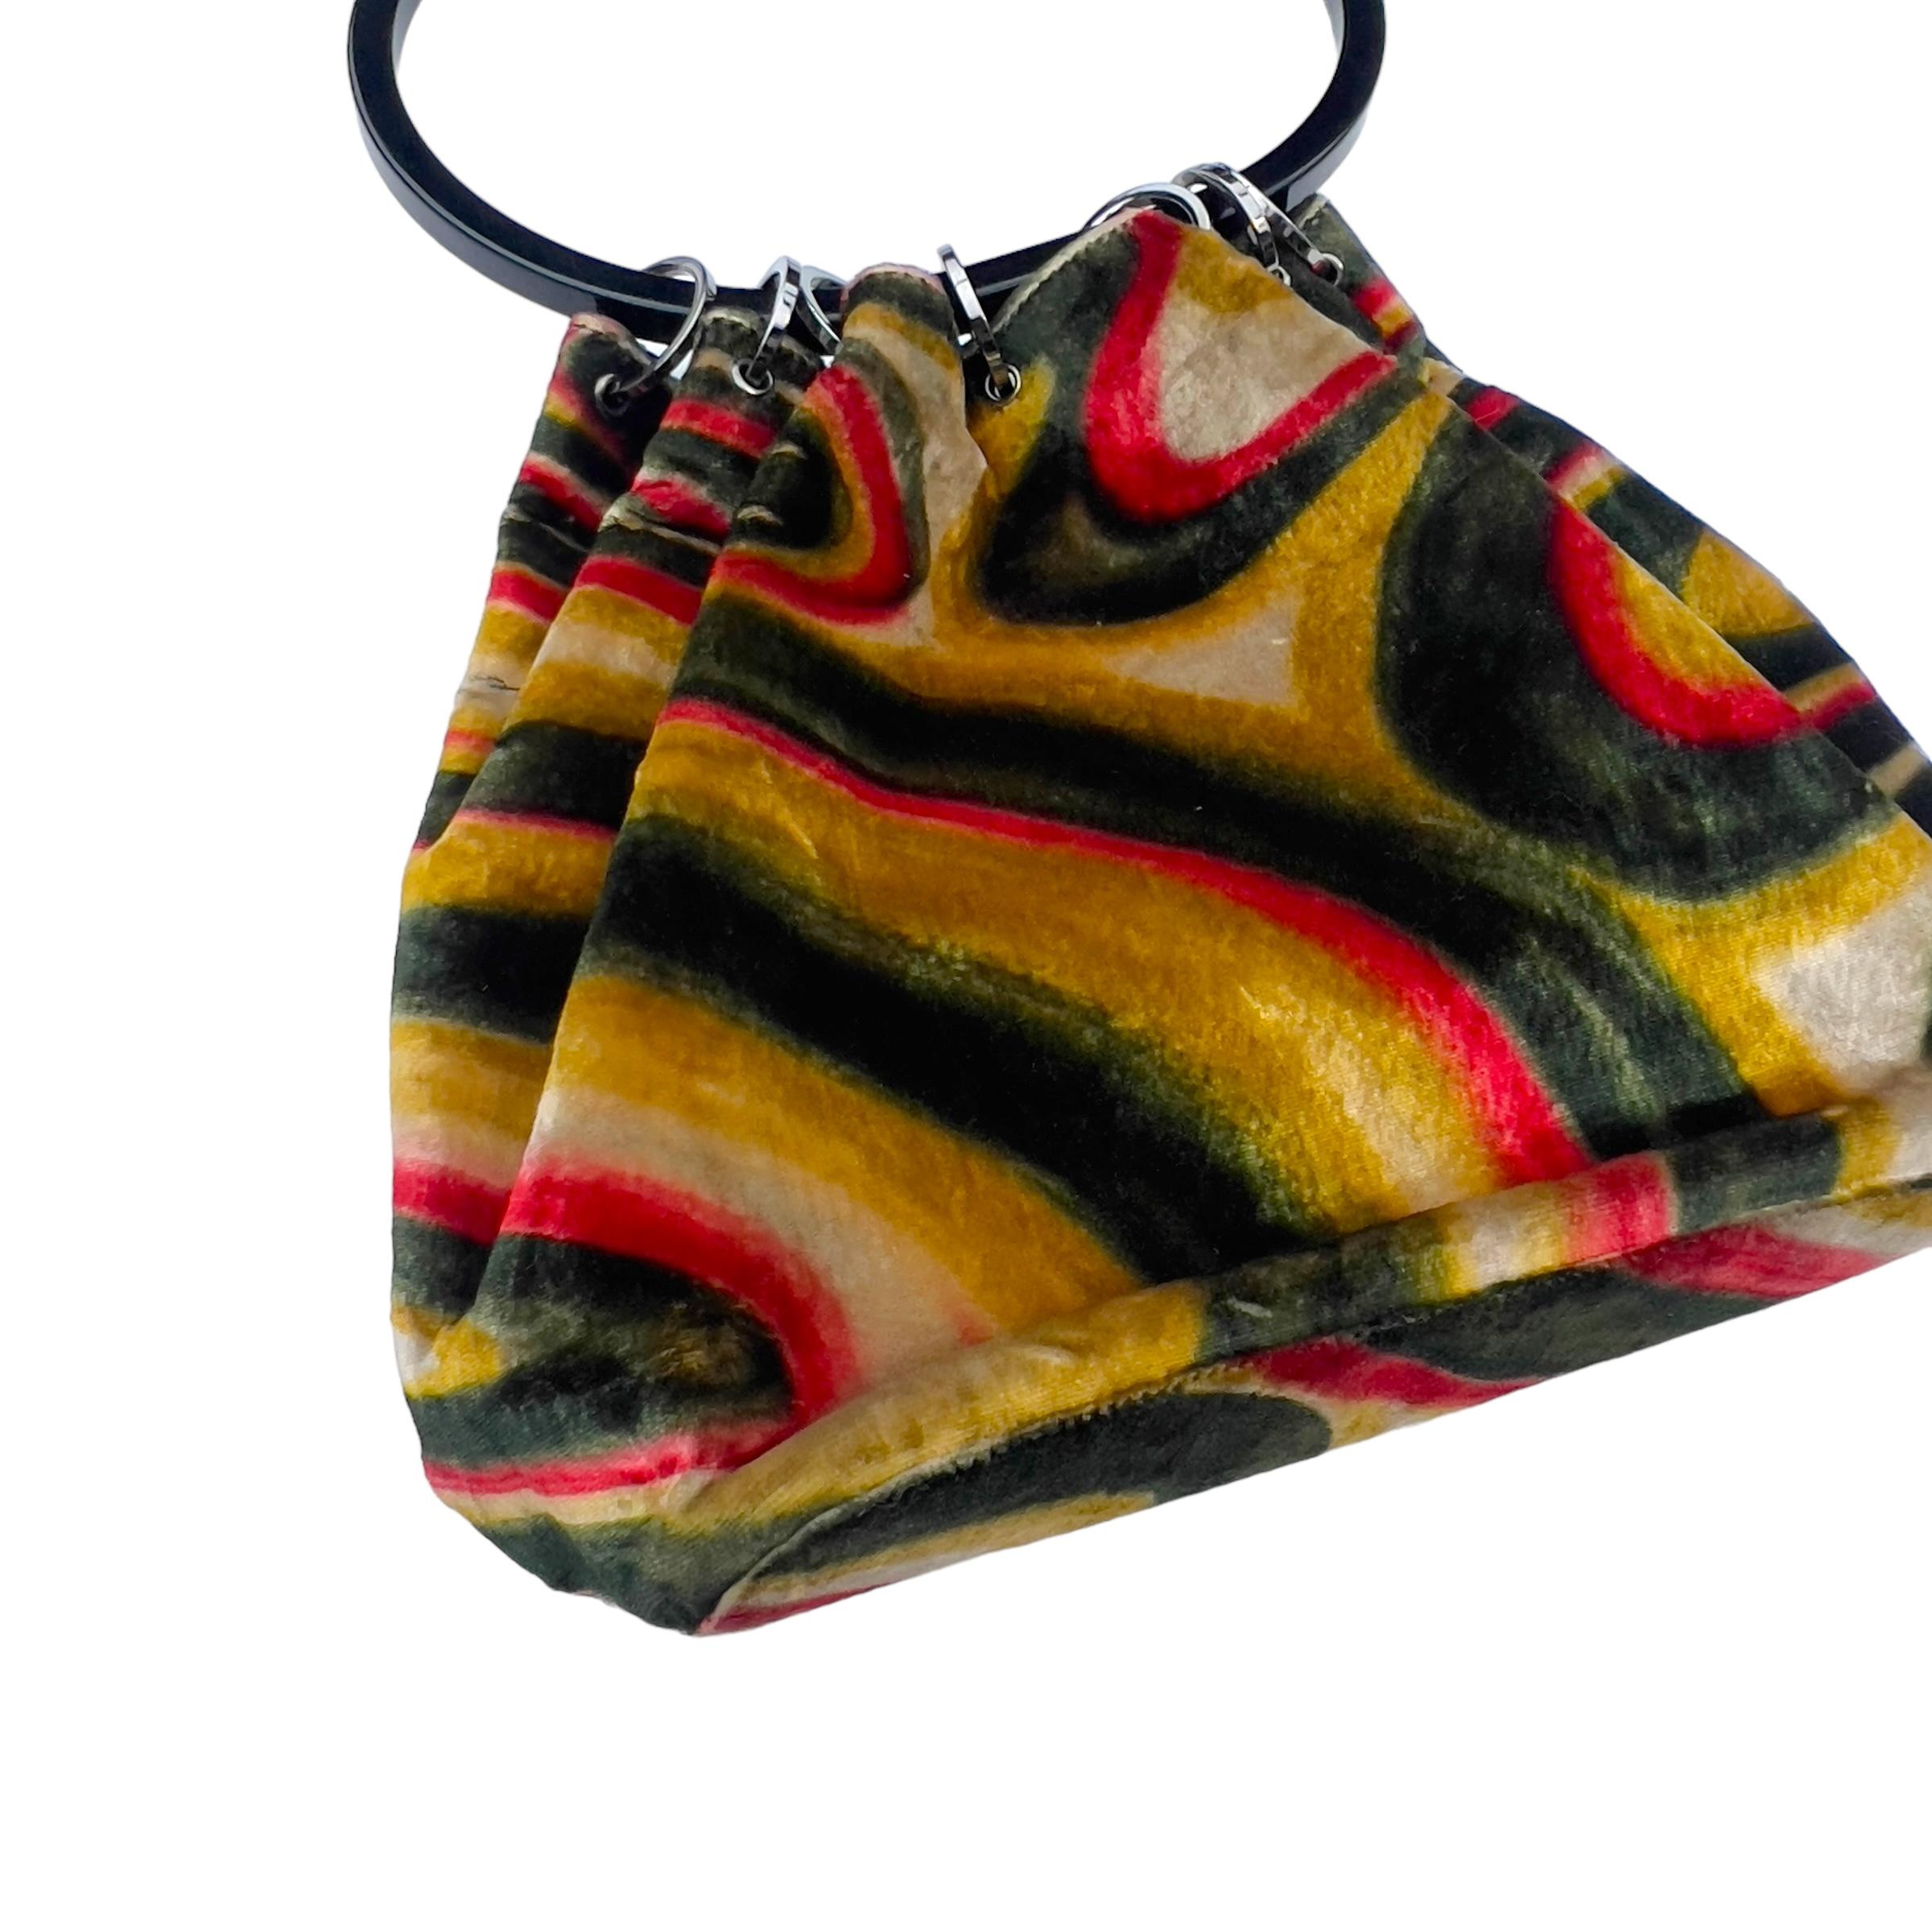 
Gucci has long been celebrated for its distinctive prints, and one of its most iconic designs is the psychedelic swirl featured on this handbag. Created by none other than Tom Ford during his influential tenure as creative director for the esteemed